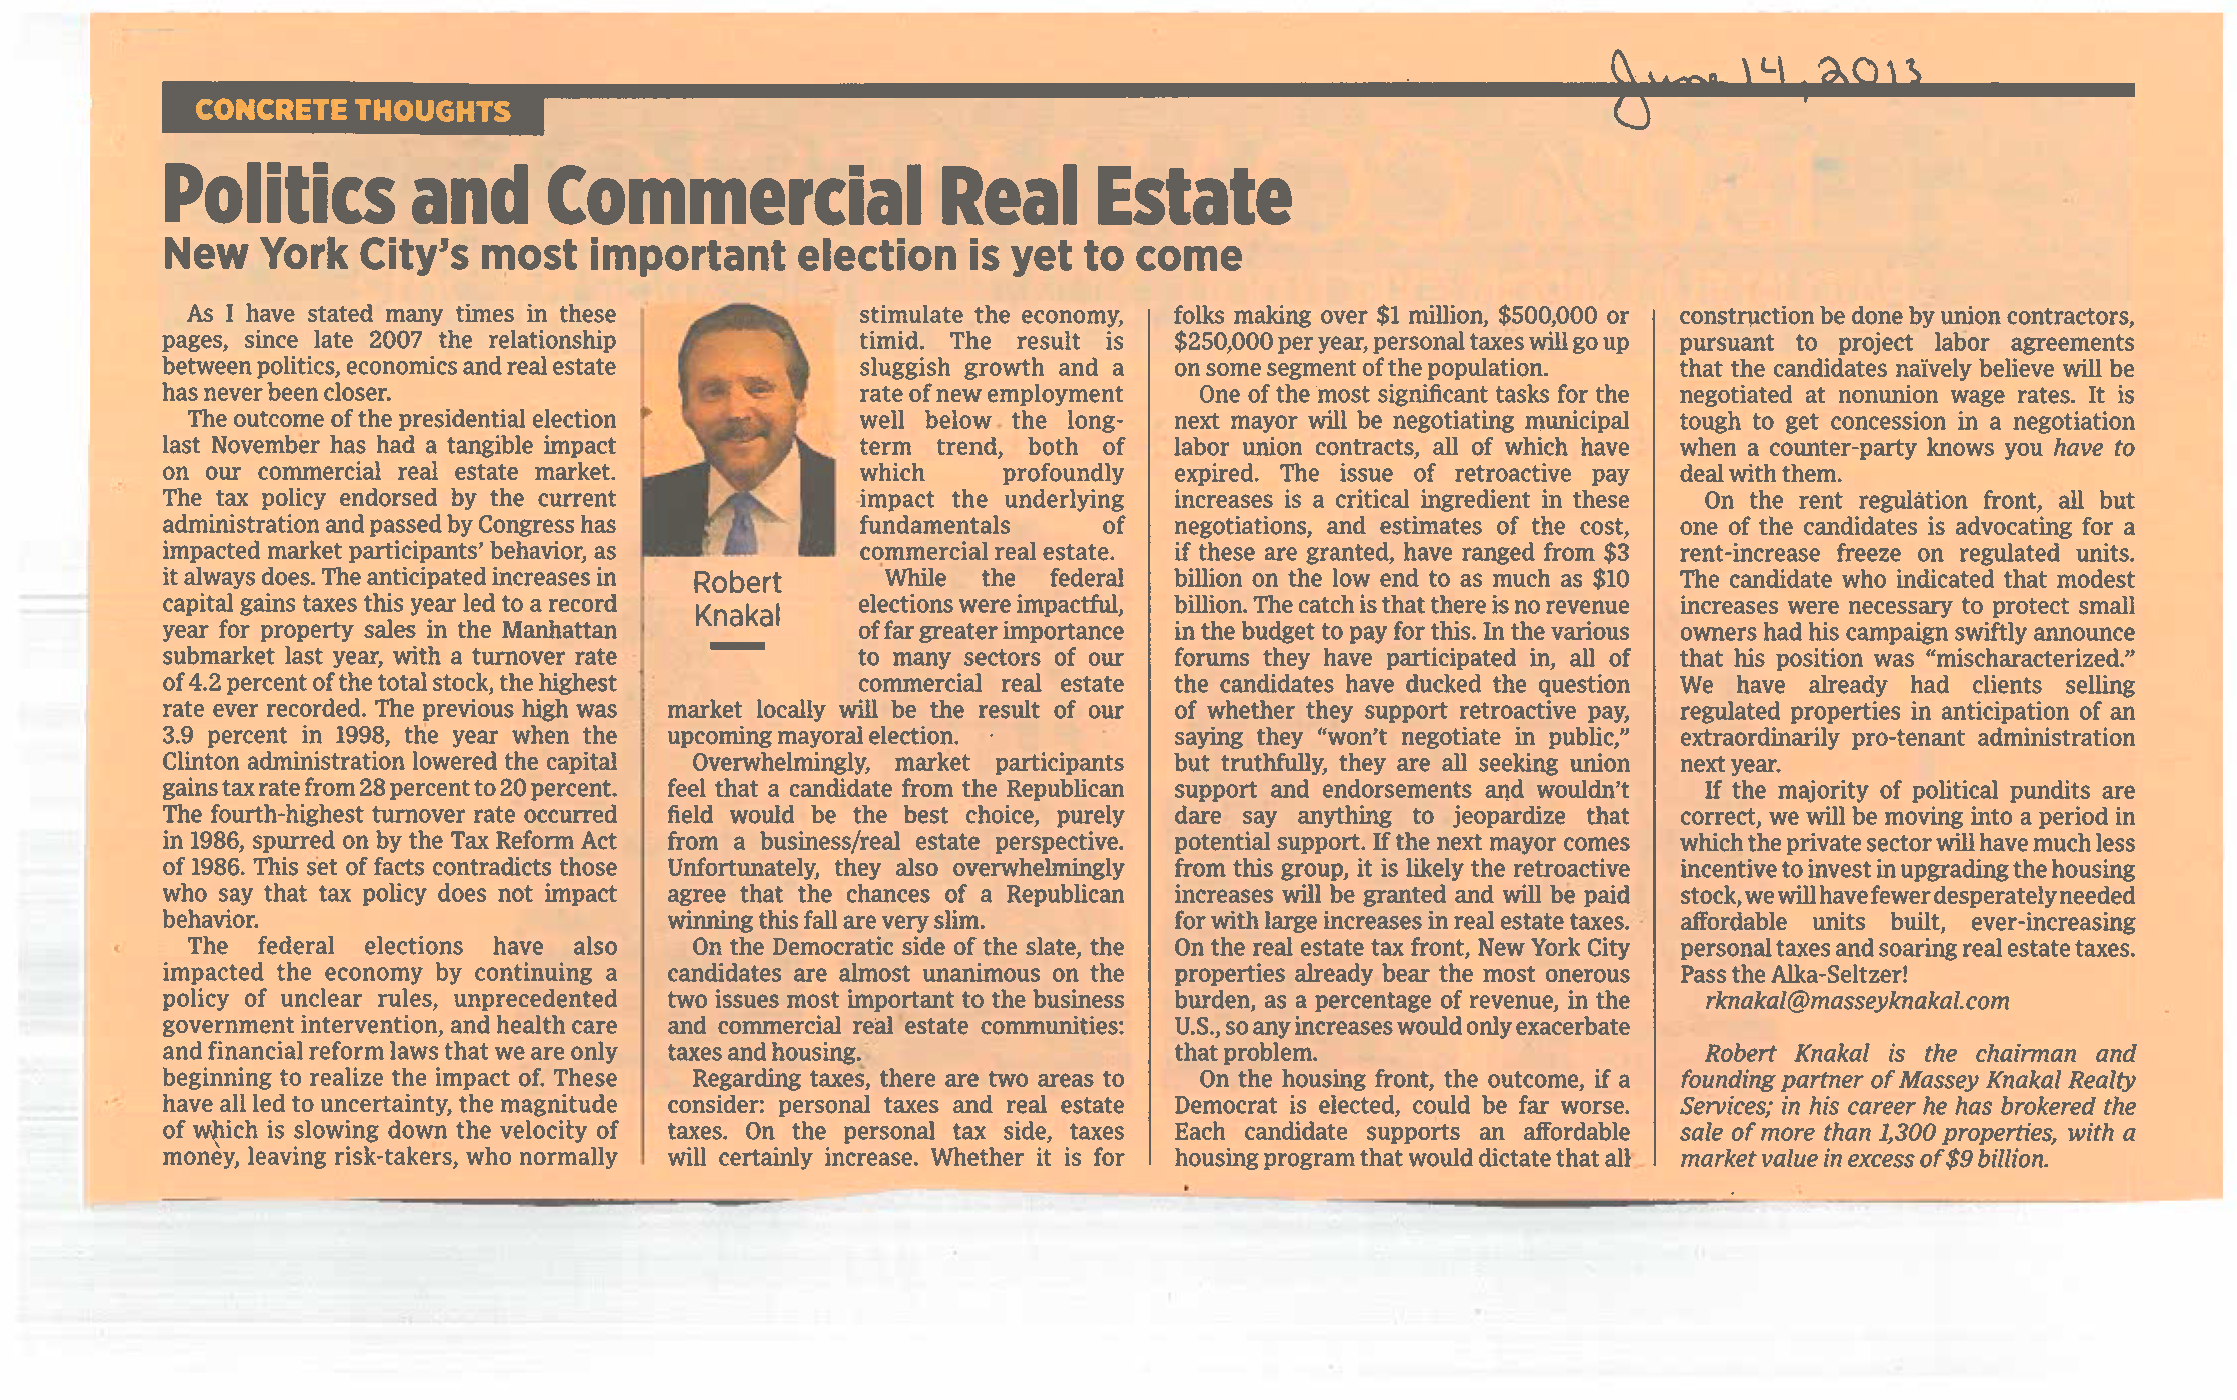 Concrete Thoughts - Politics and Commercial Real Estate - June 14 2013